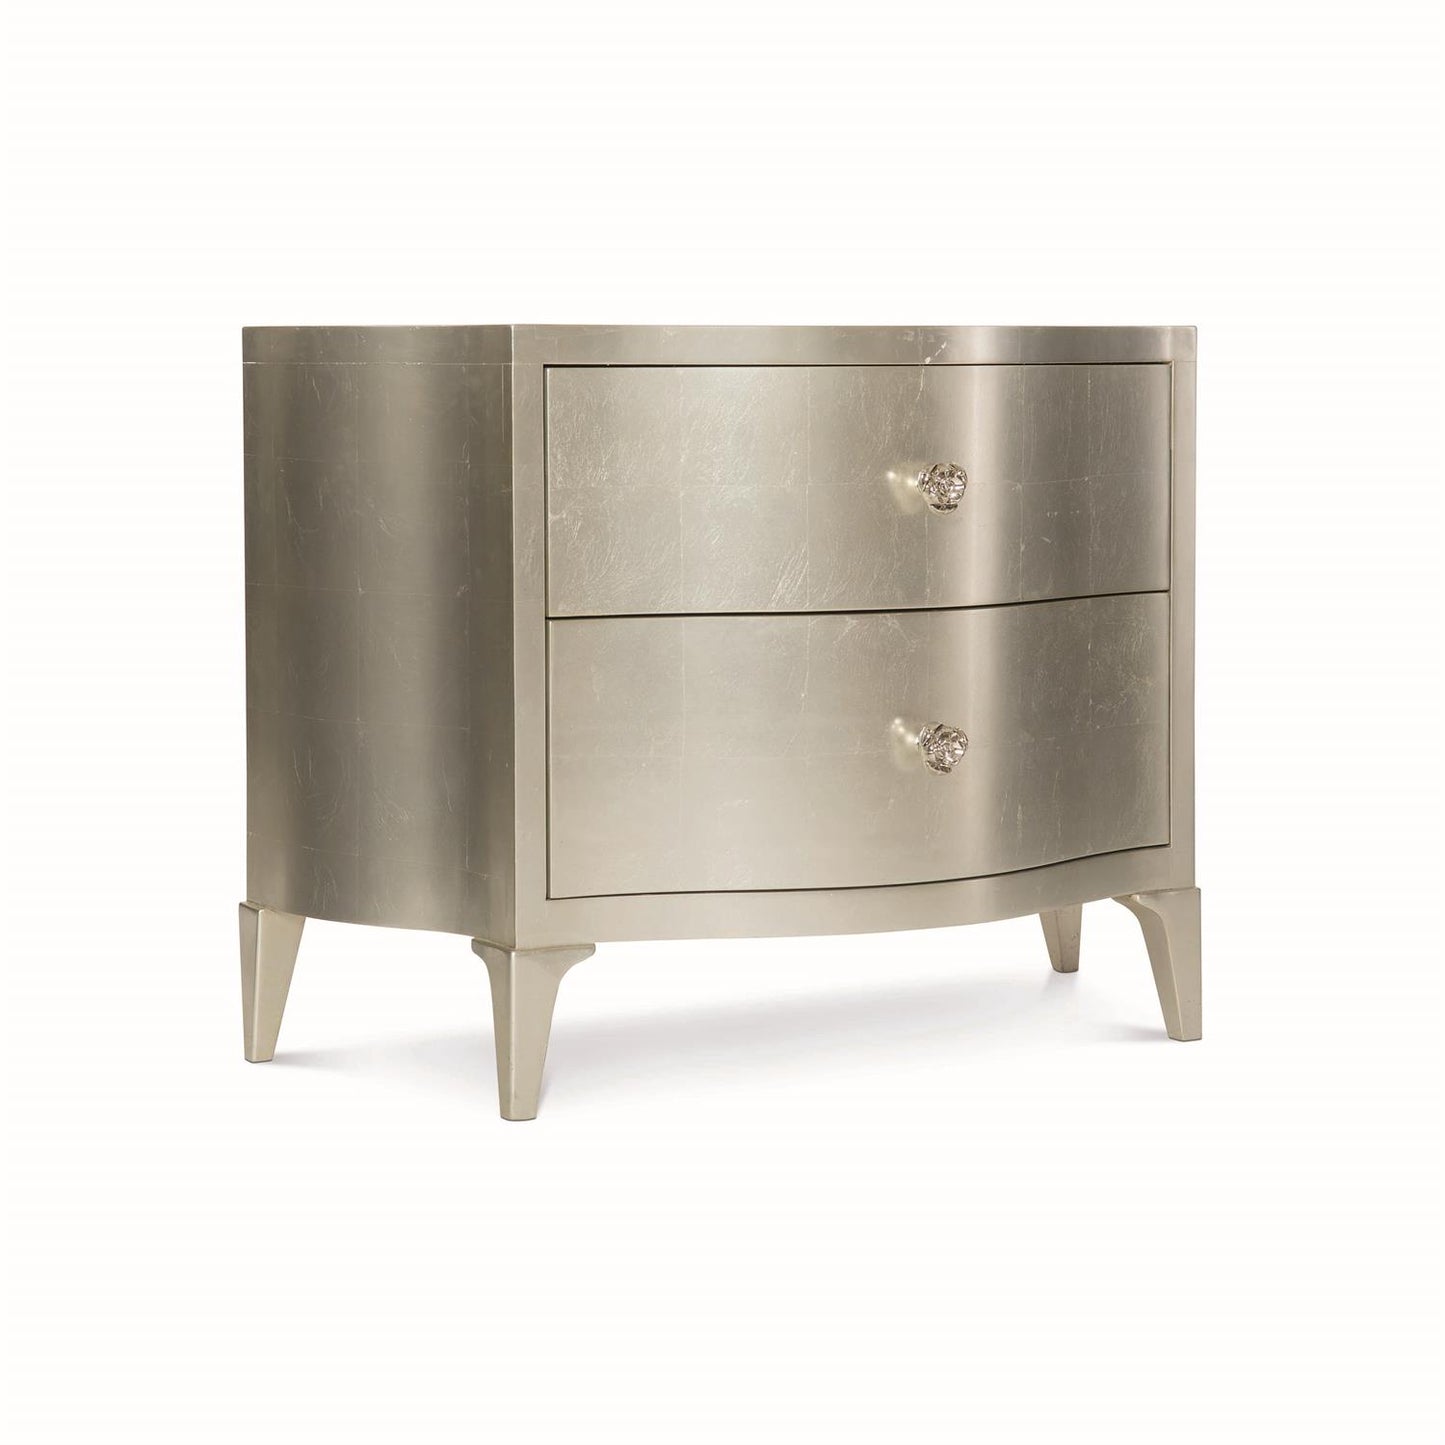 Alista, Two Drawers, Rose Handles, Angled, Nightstand